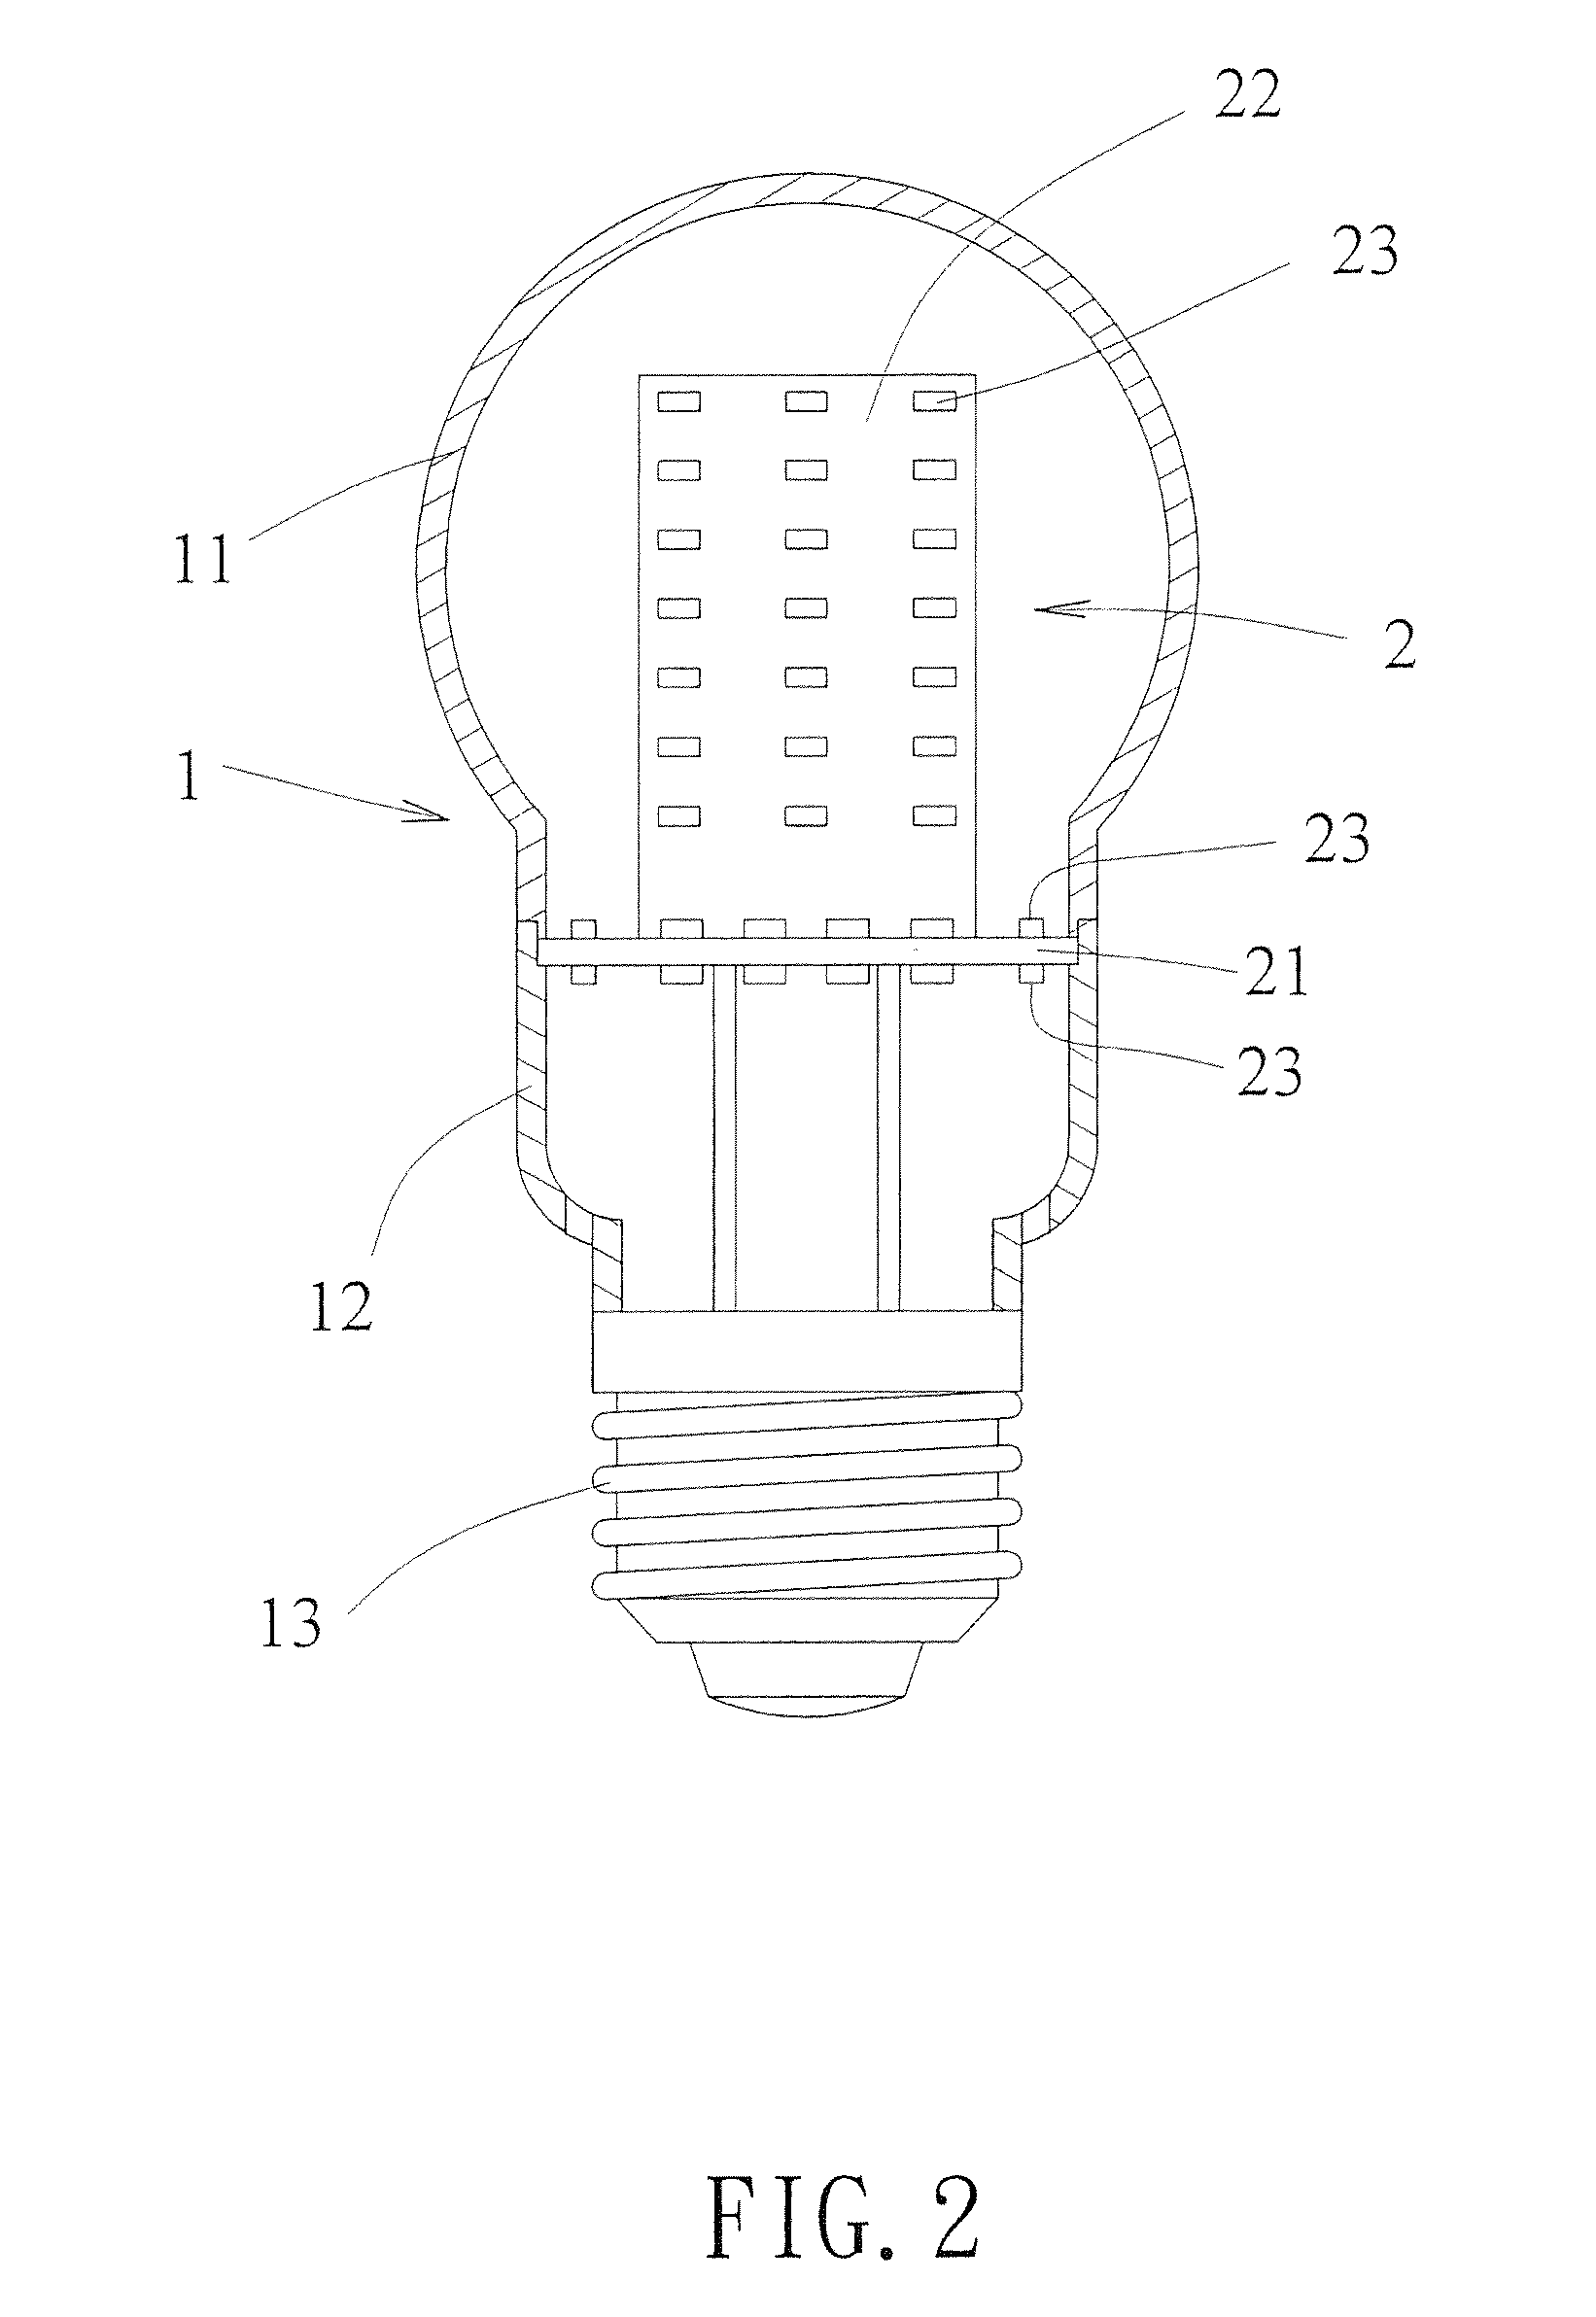 Light bulb having light emitting diodes connected to at least two circuit boards